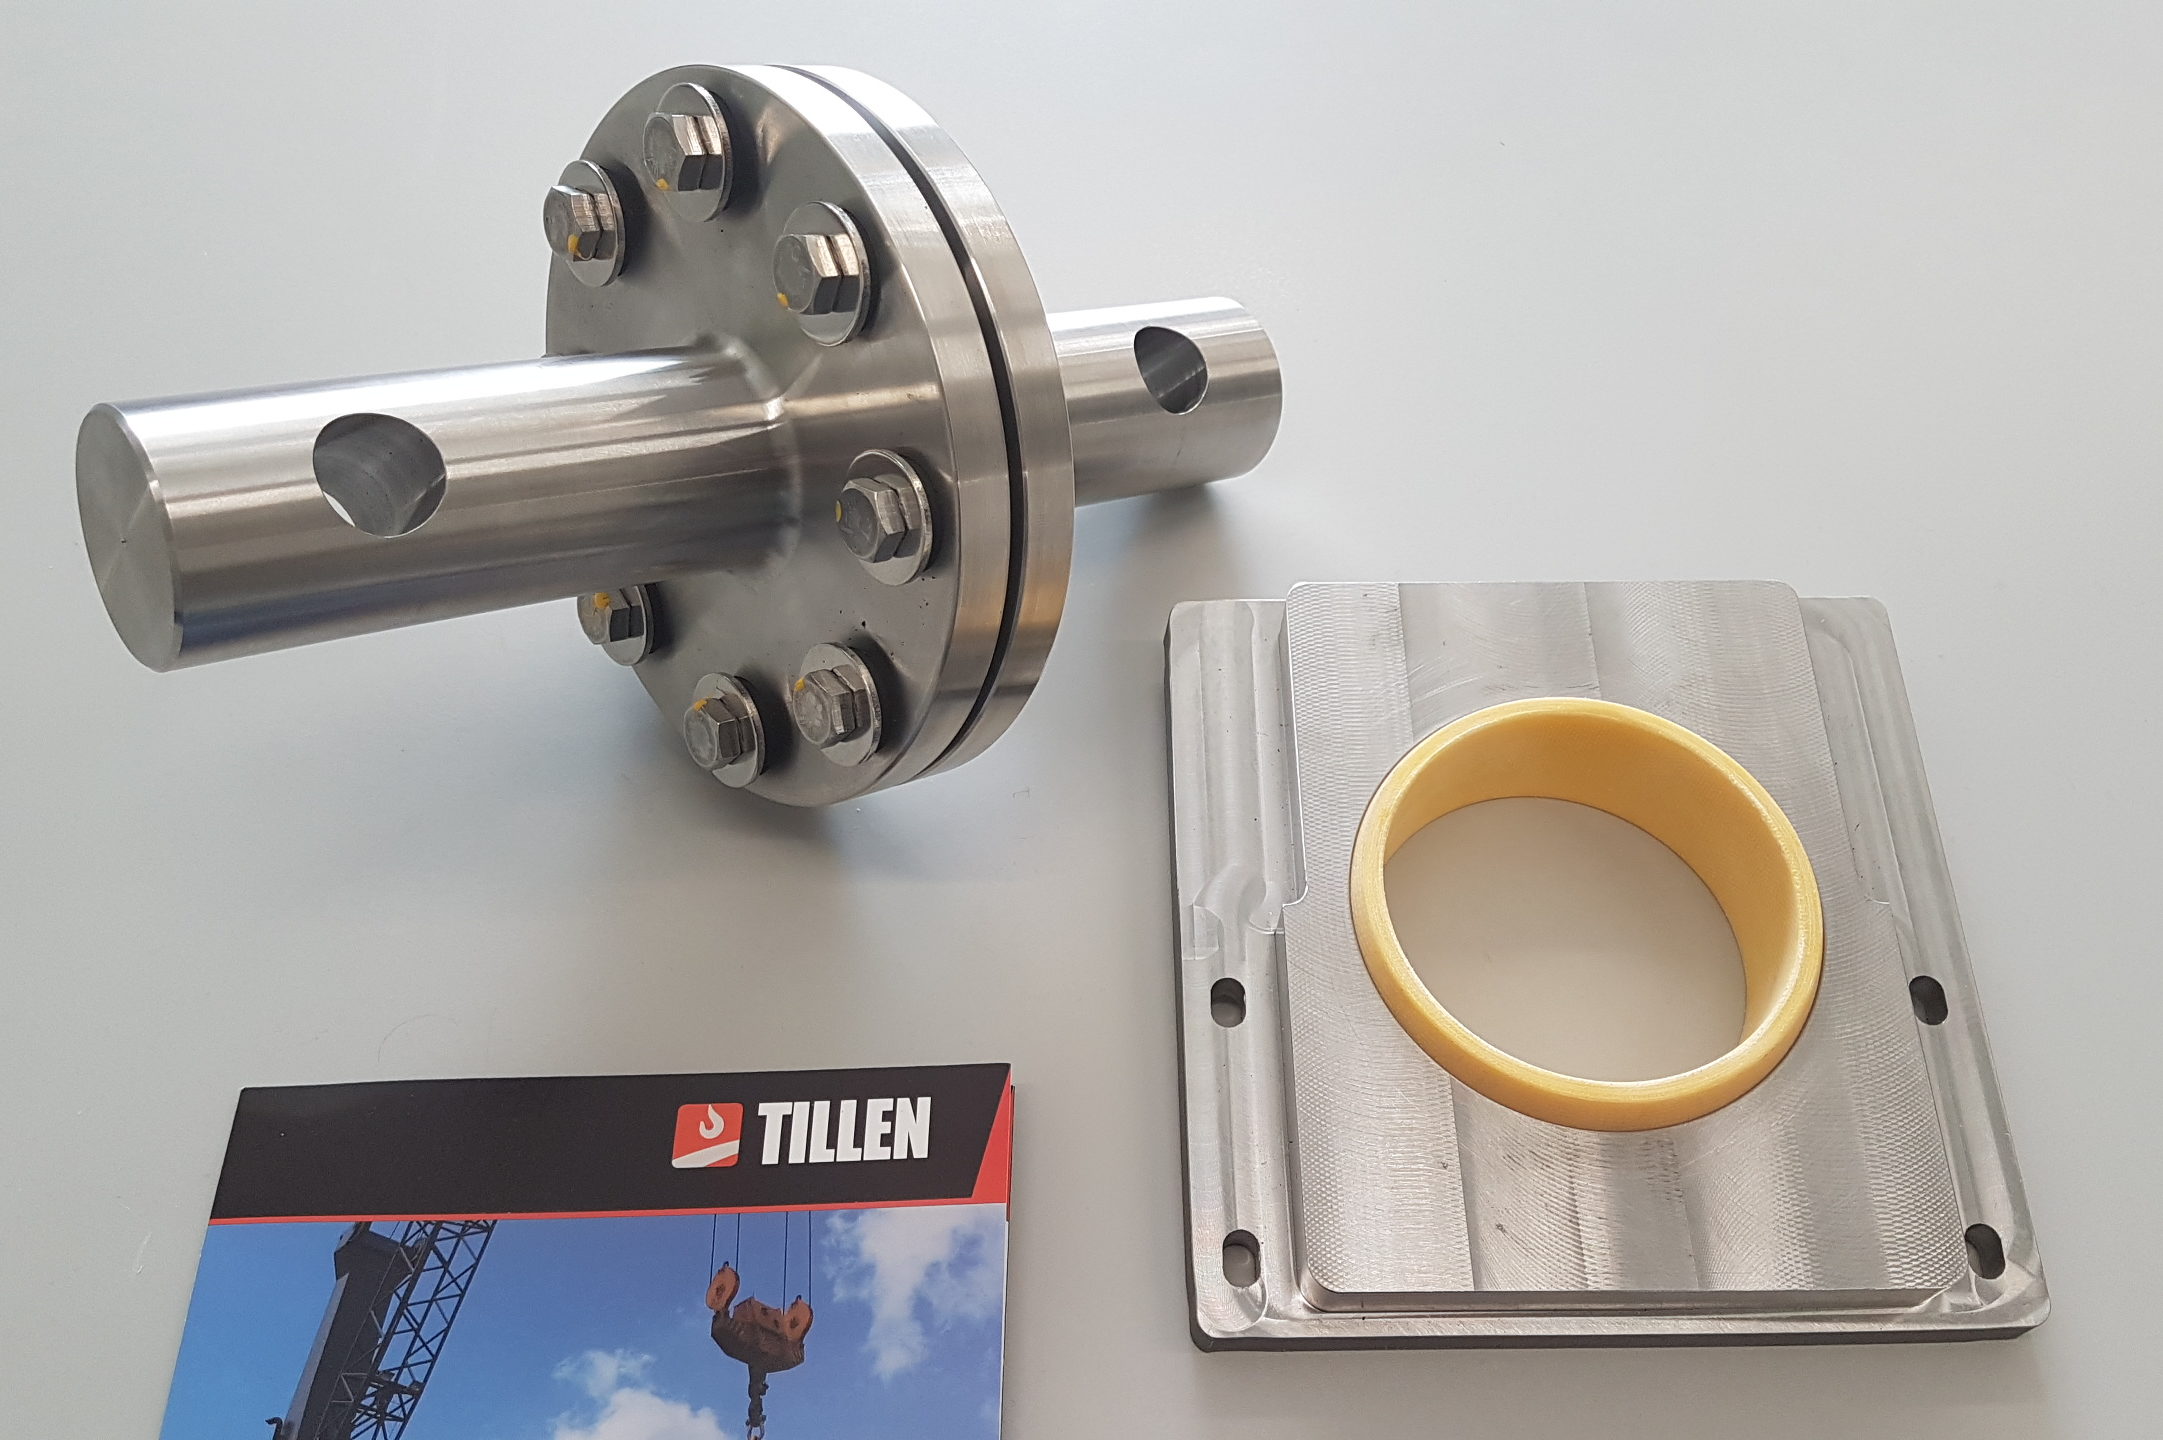 Spherical plane bearings with easy fit slot-housing have been developed to be applied in a drum assembly in chlorine-water environment. 